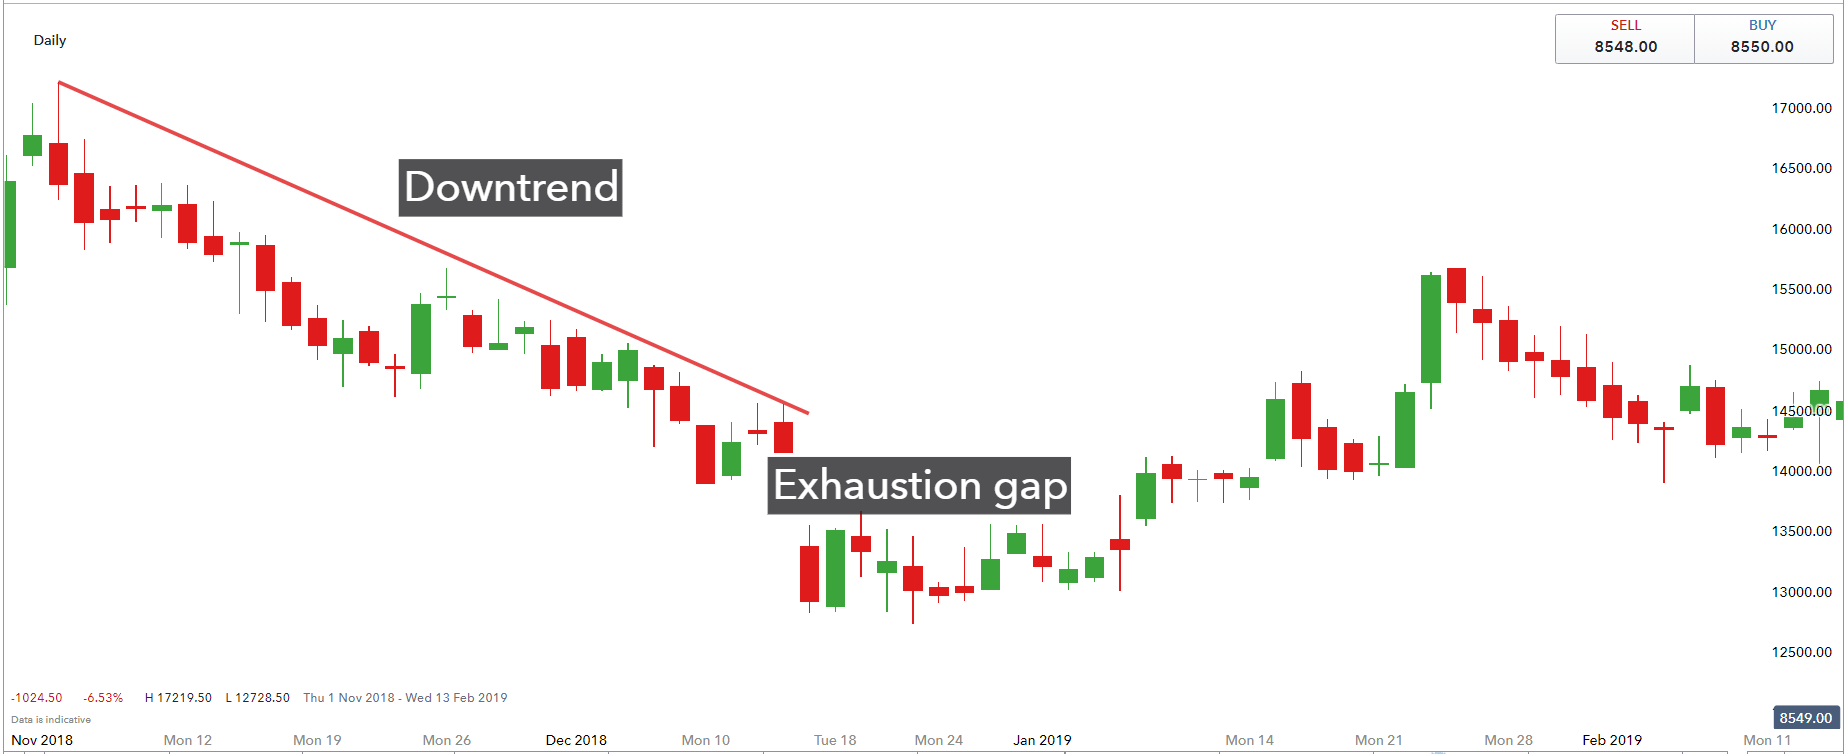 Exhaustion gap chart